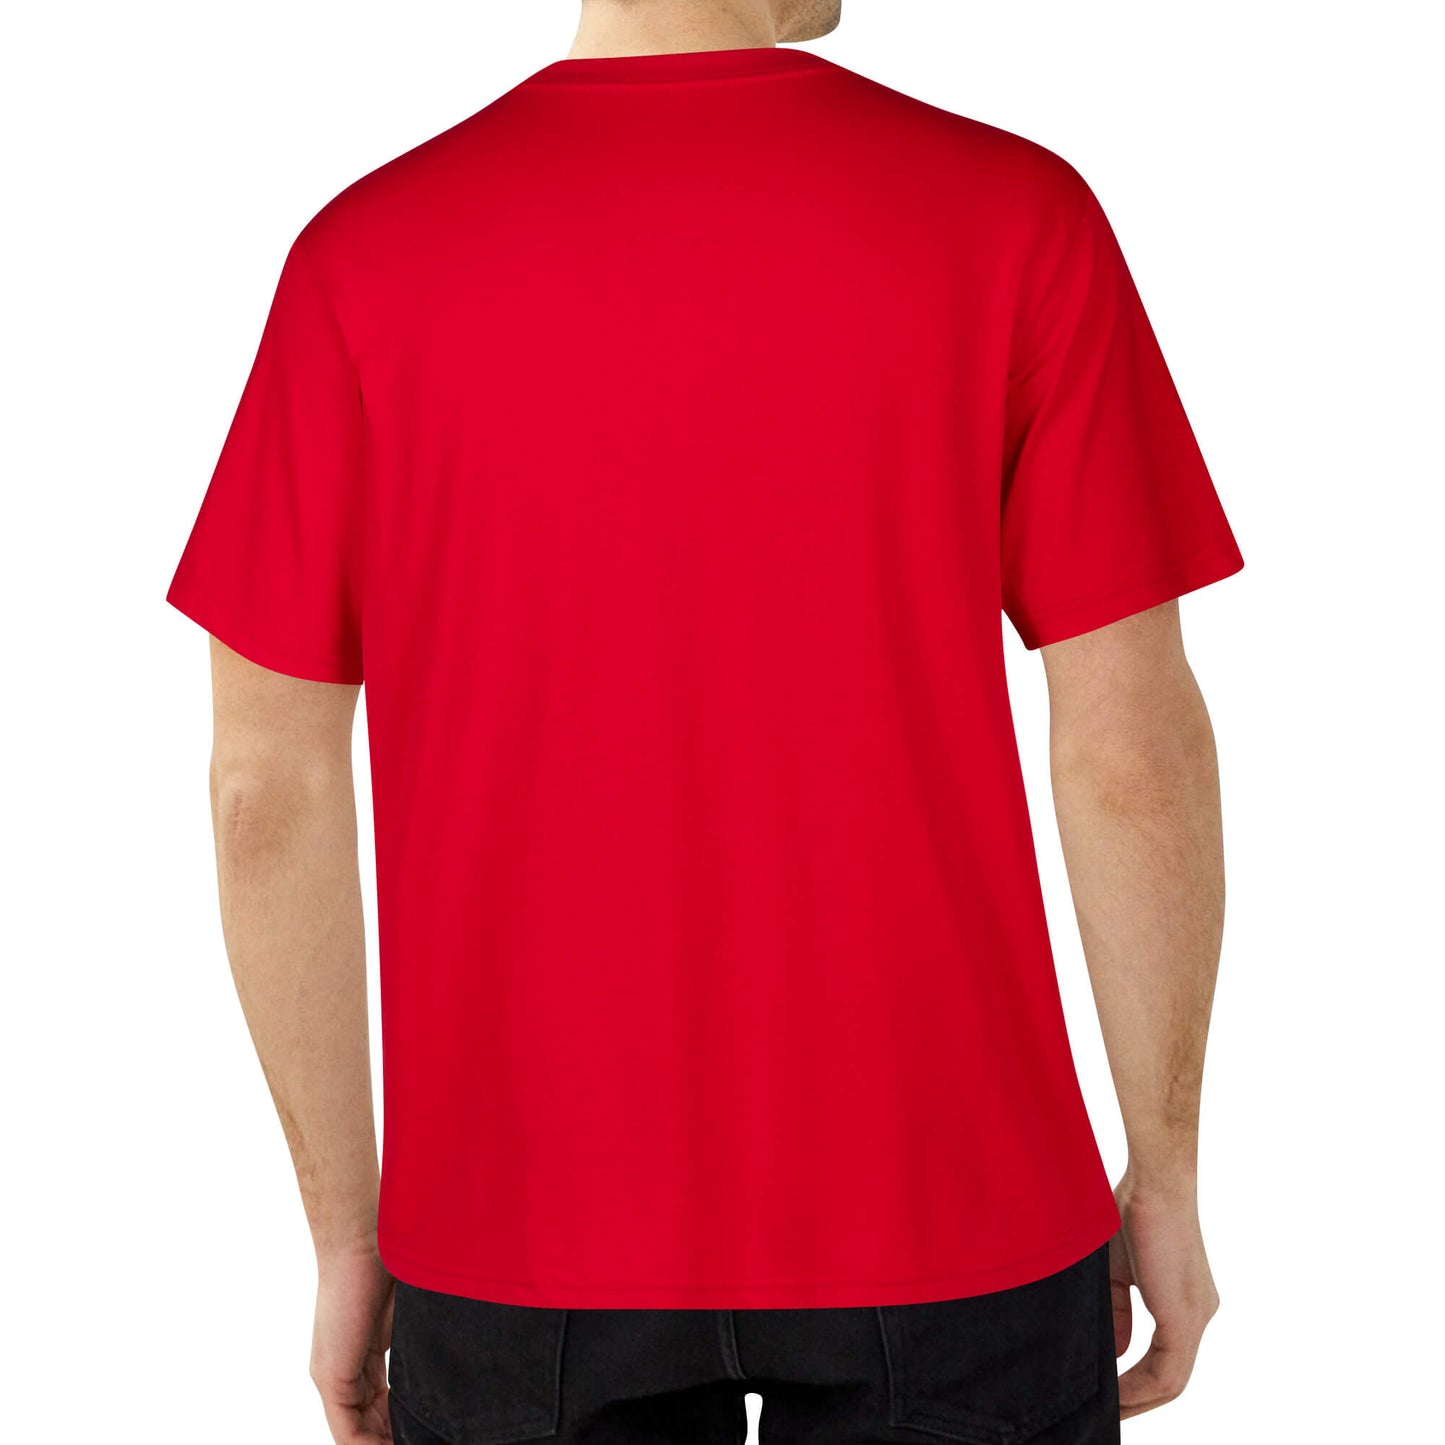 Embroidered Mens Cotton T shirt (Chest Design)